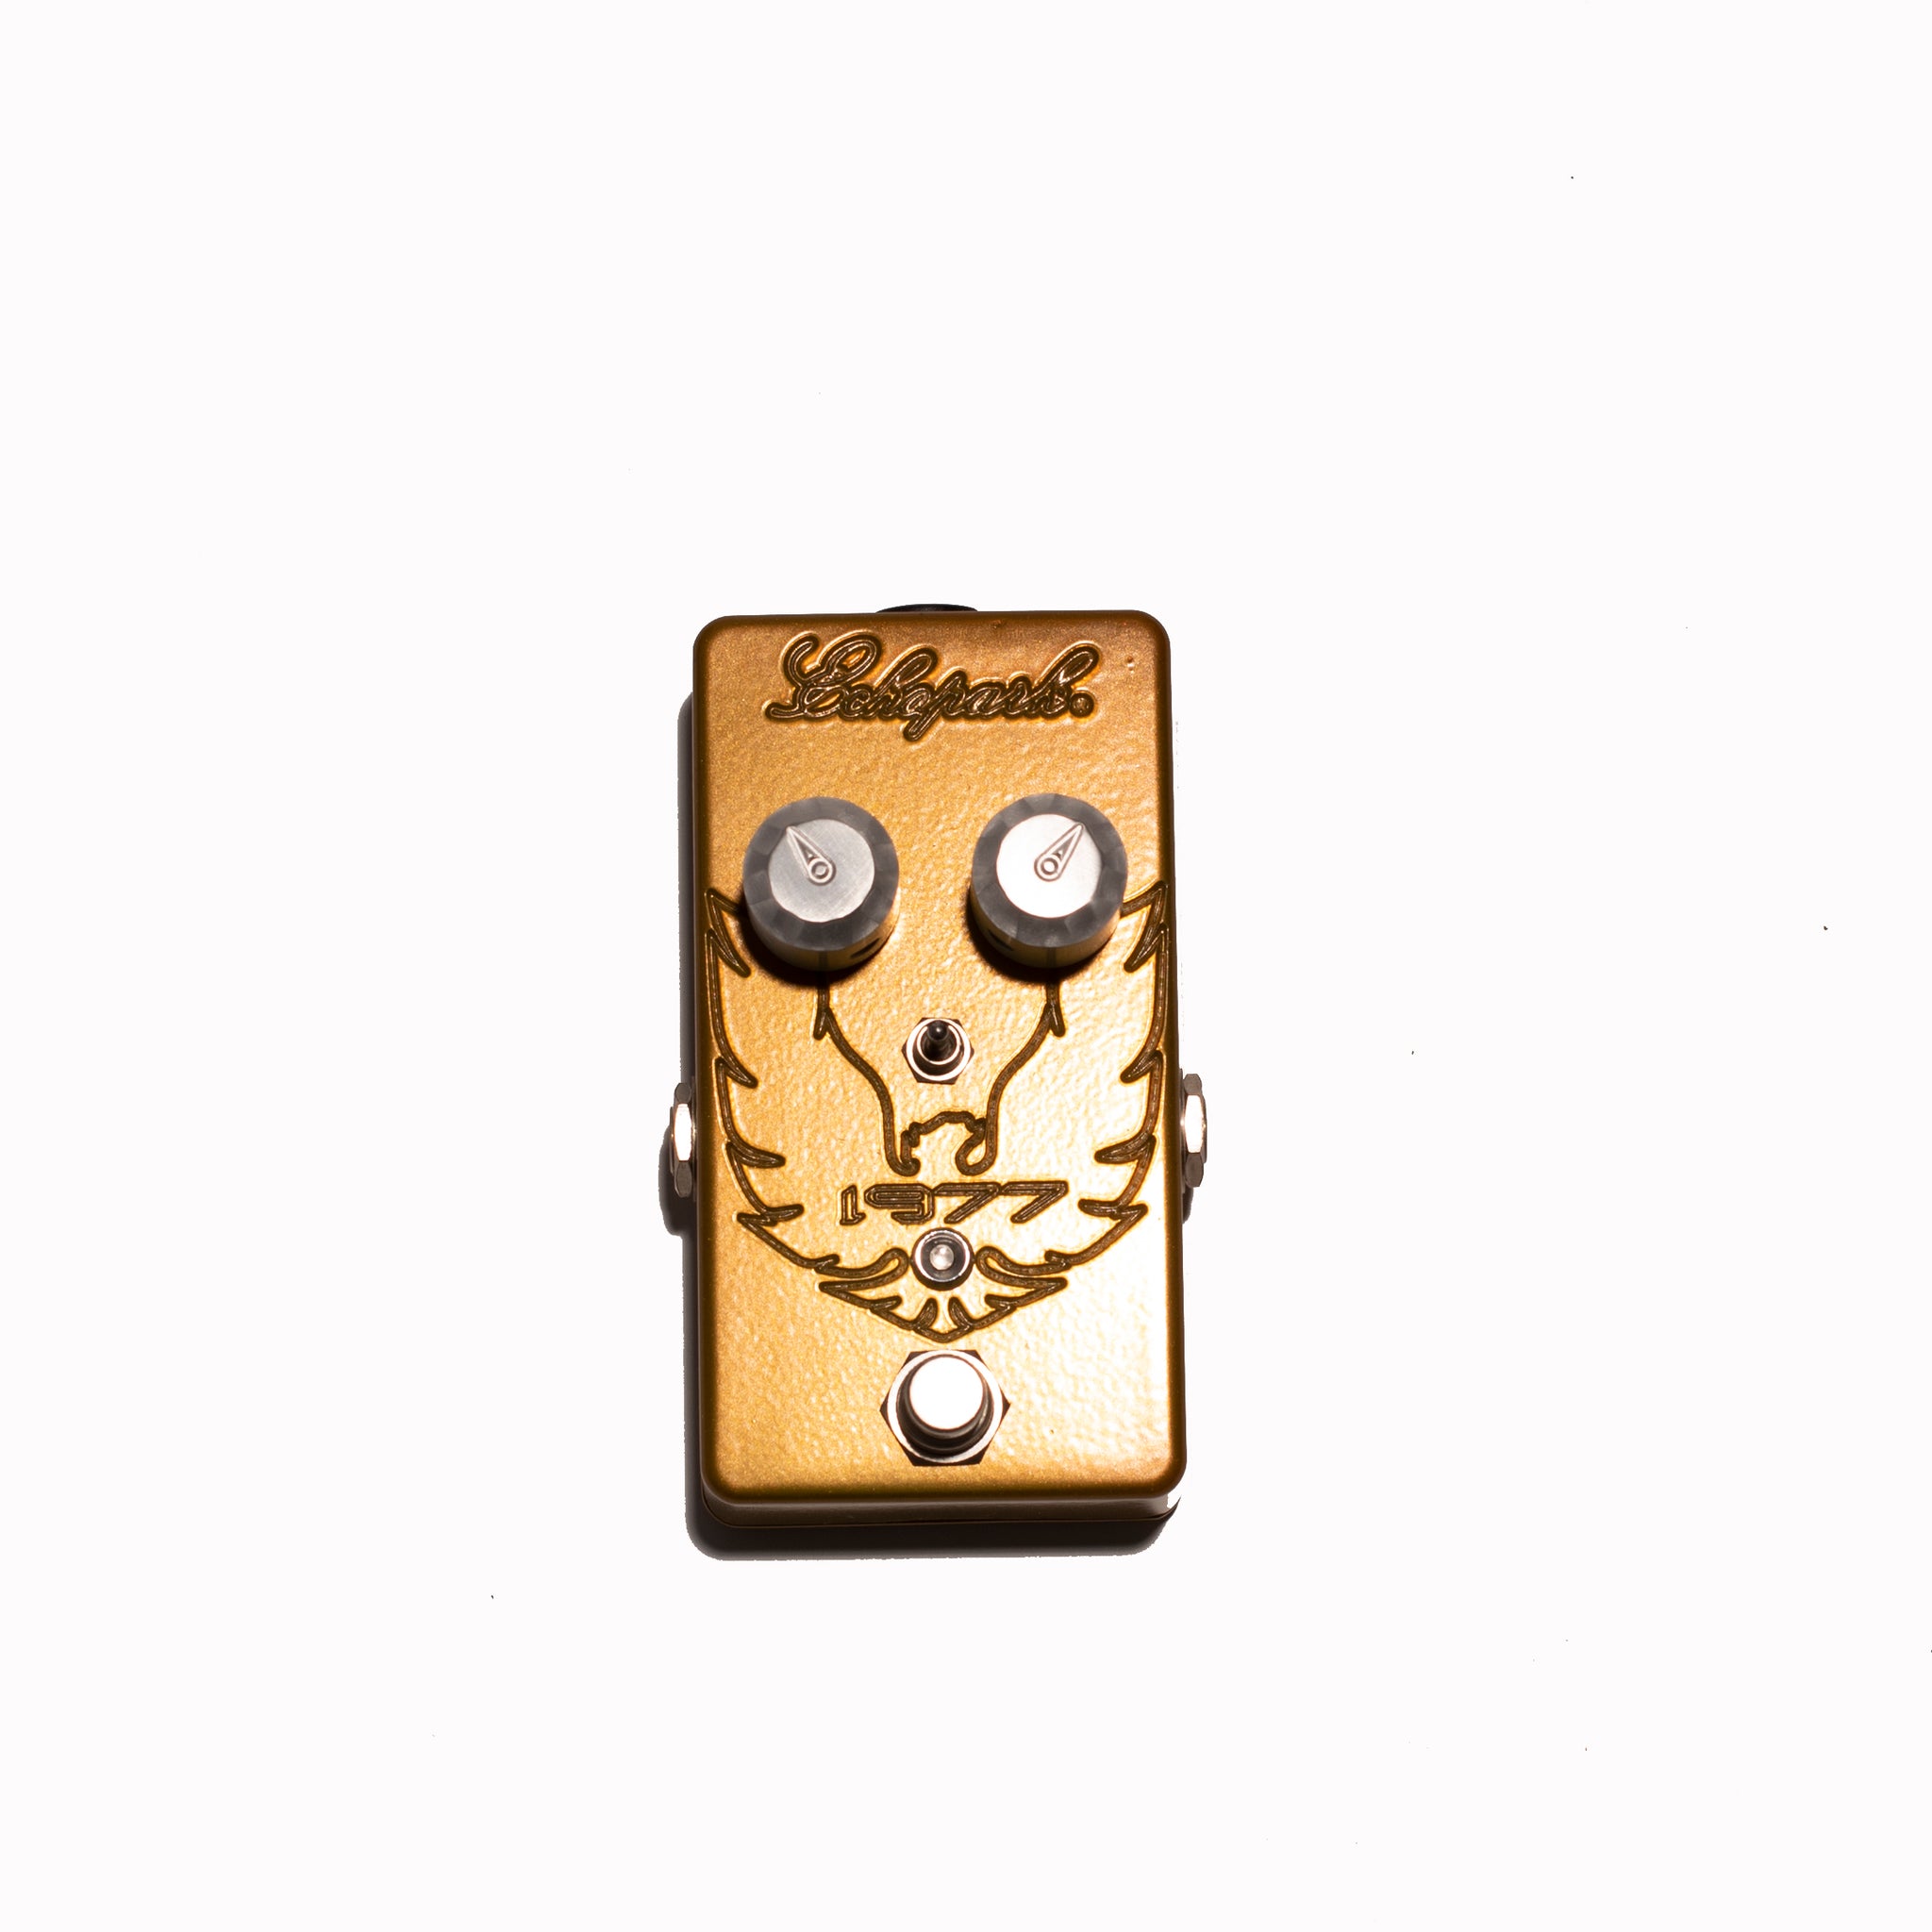 Echopark 1977 Gold Edition Overdrive